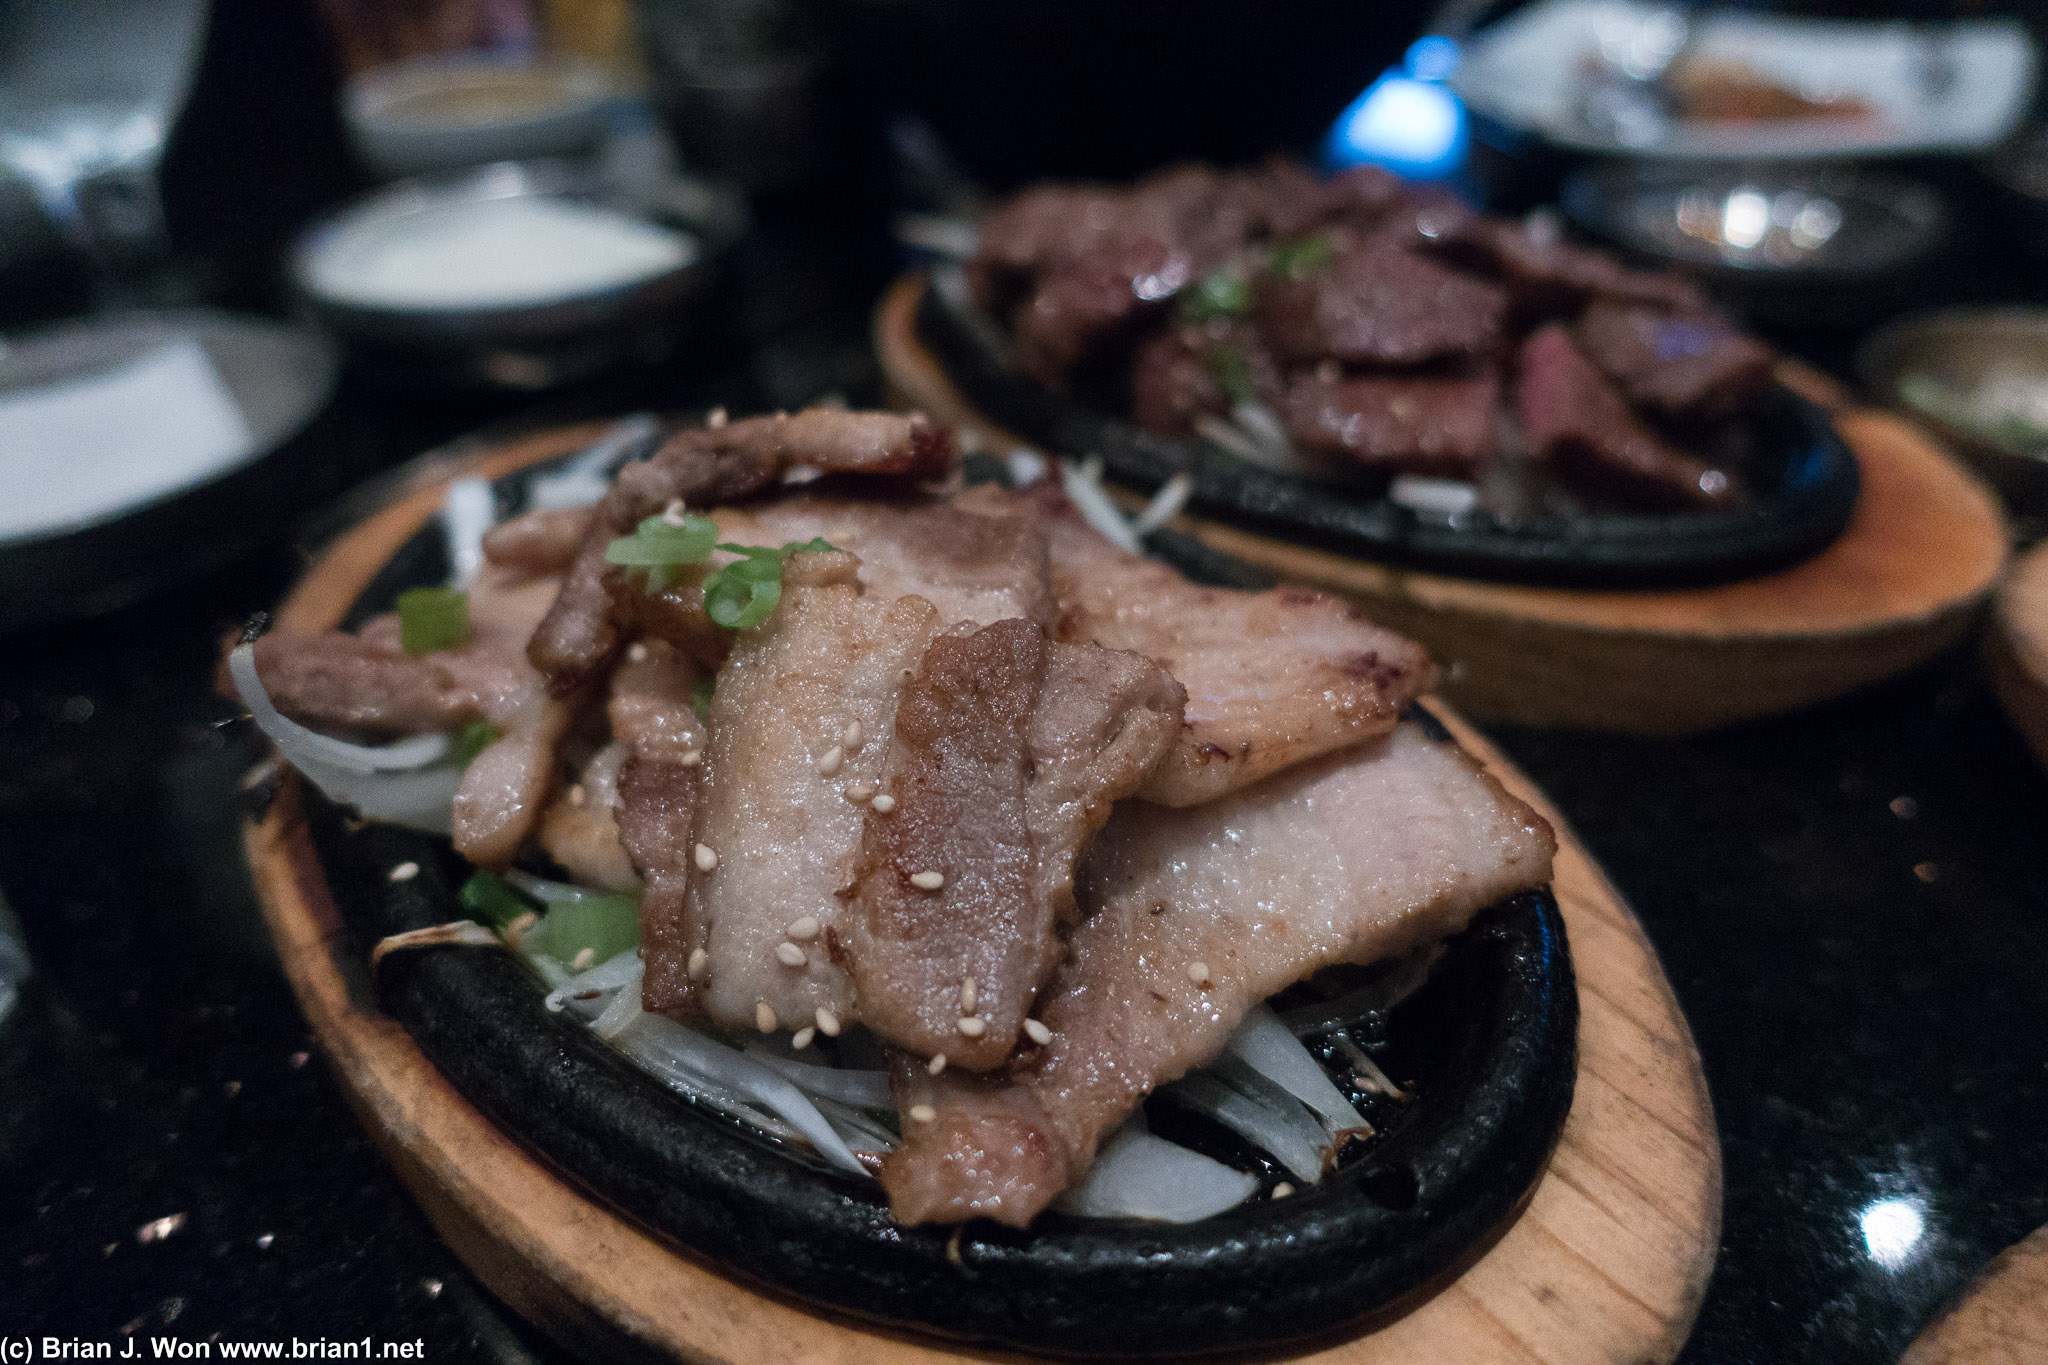 Pork belly. Pretty tasty but ultimately forgettable.